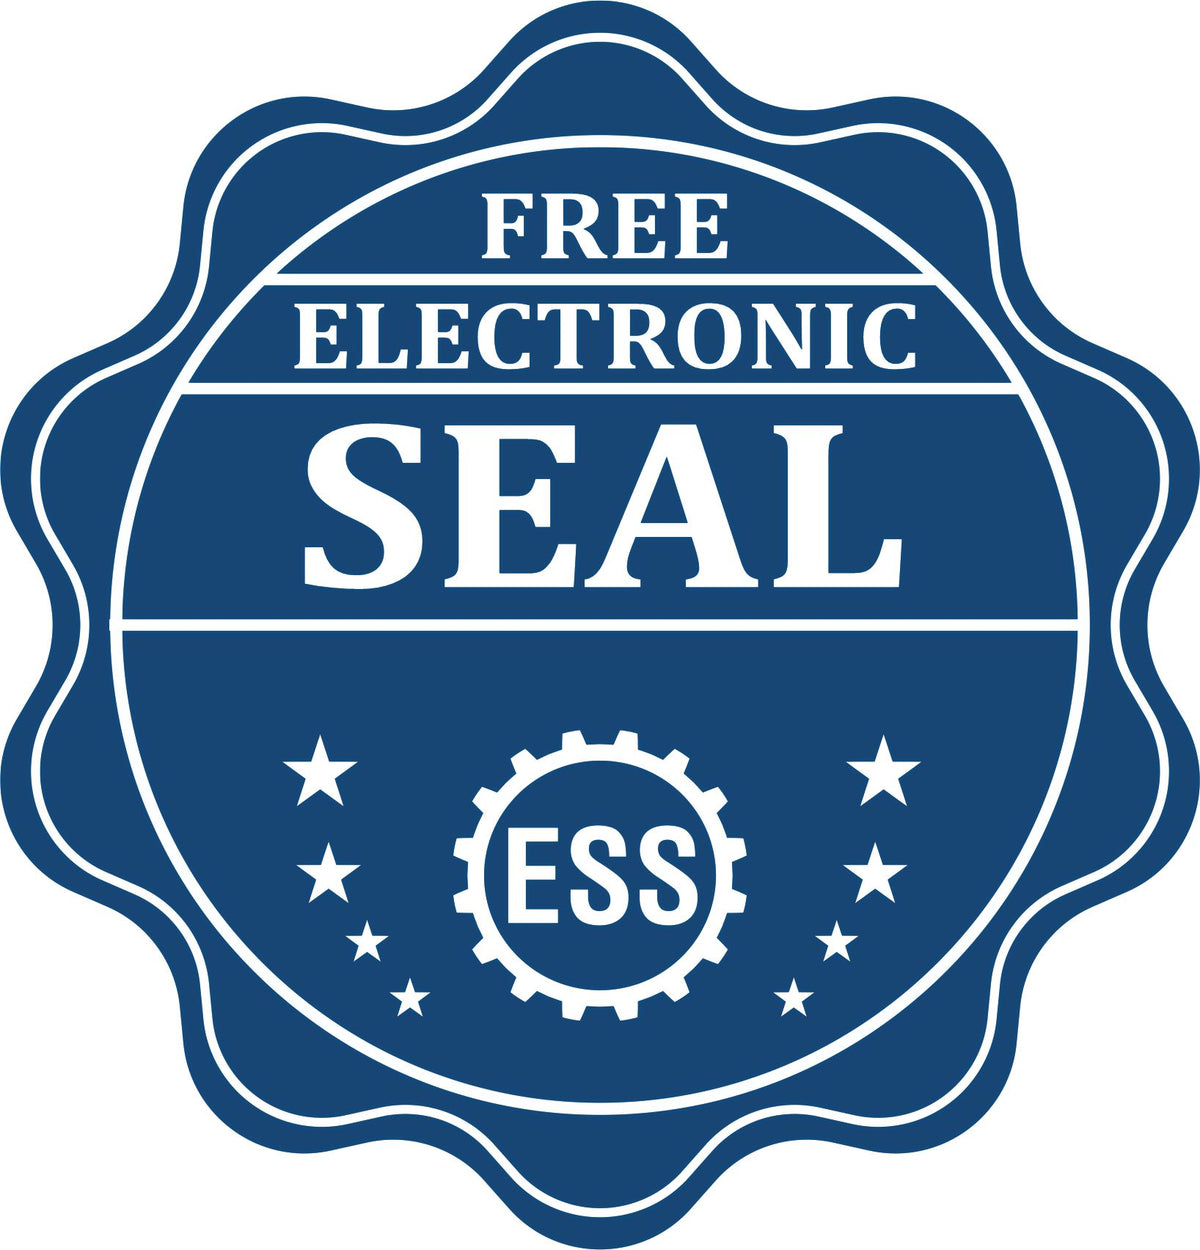 A badge showing a free electronic seal for the Long Reach Indiana Land Surveyor Seal with stars and the ESS gear on the emblem.